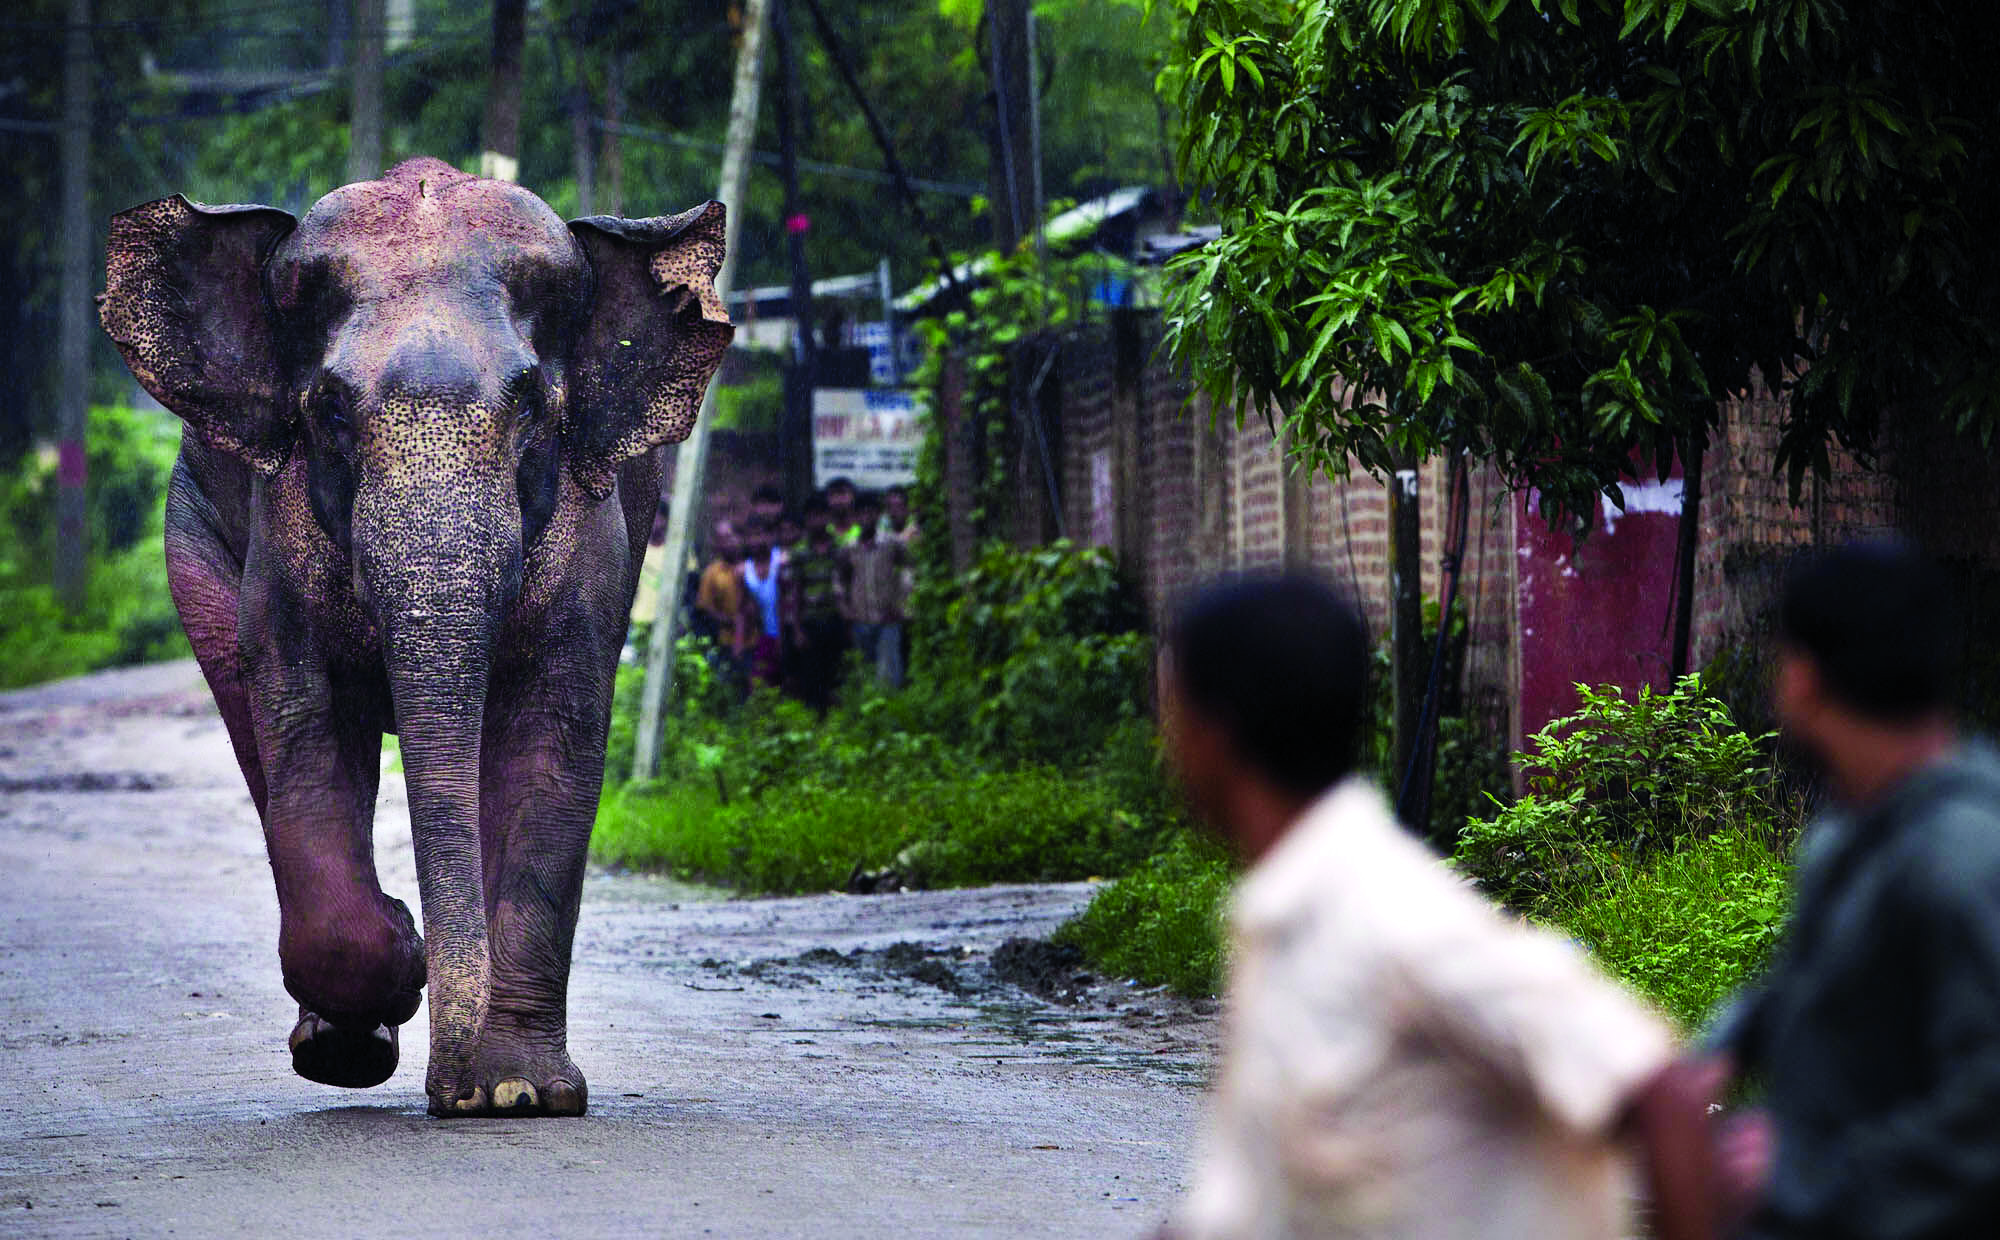 Critical to set up elephant corridors to curb human-animal conflict: State